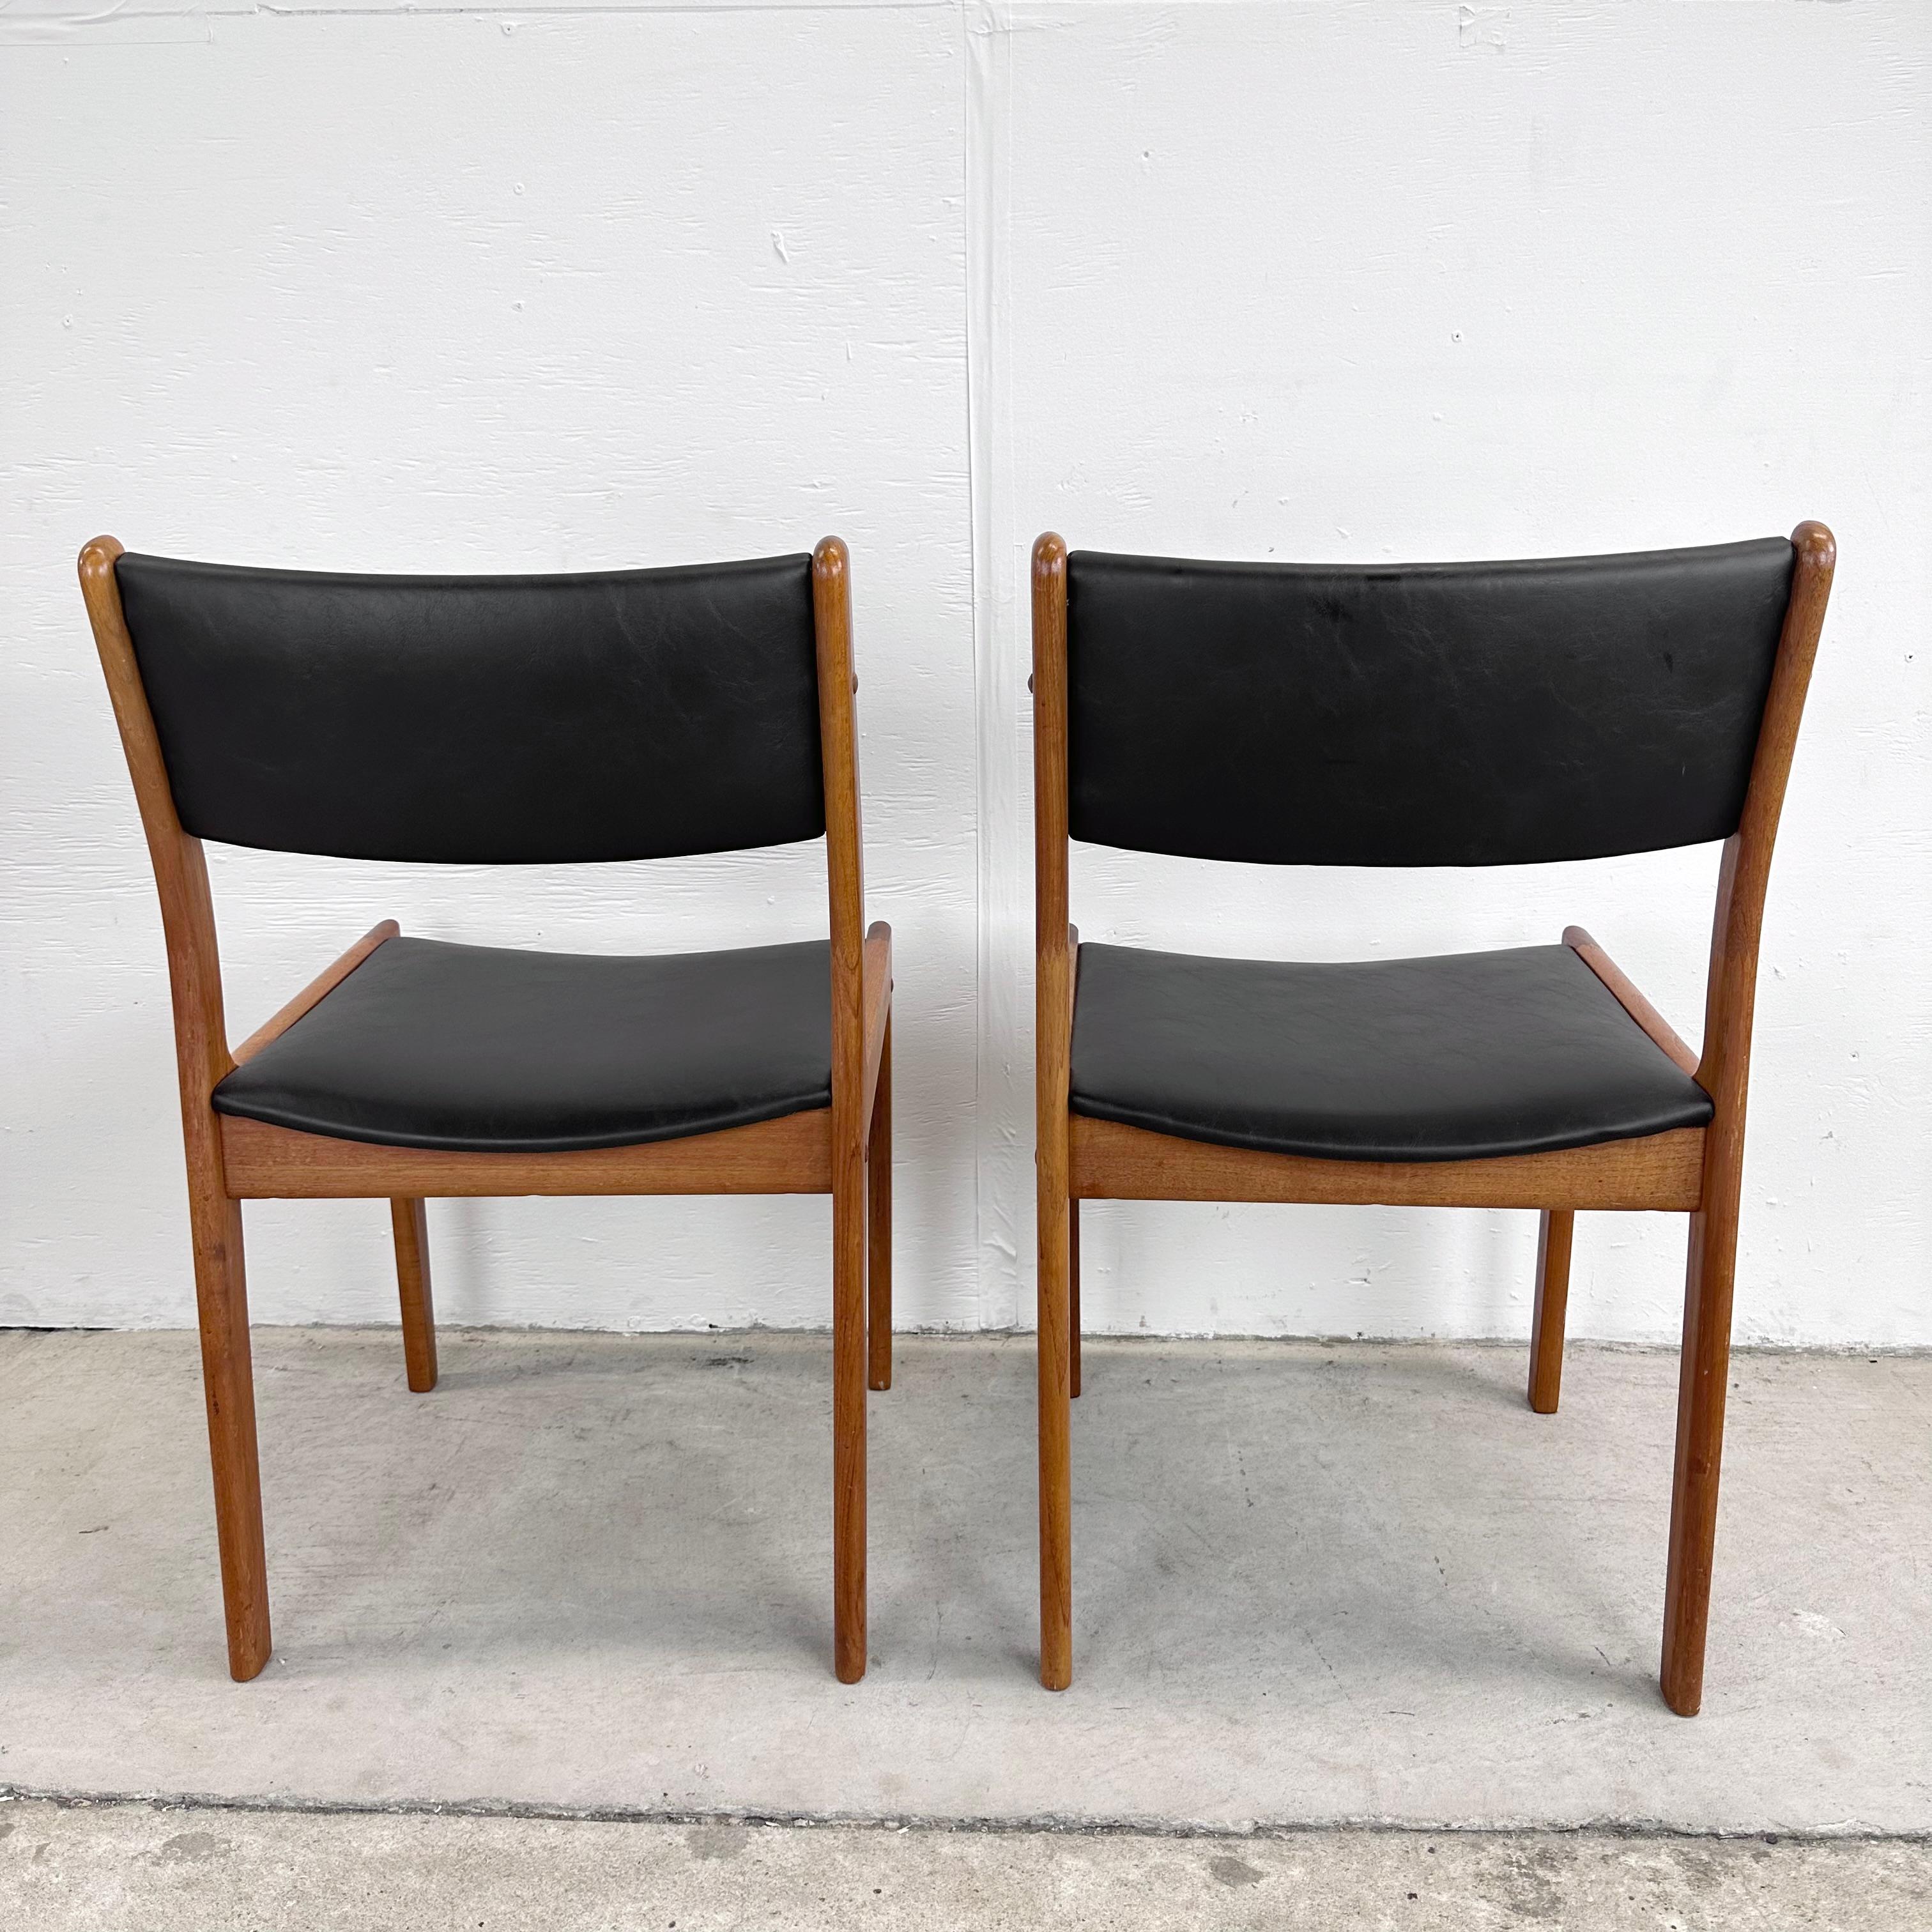 Infuse your dining area with a touch of Danish Modern elegance with these Vintage Teak Dining Chairs – a set of four that promises not only style but also comfort and longevity.

These chairs have been masterfully brought back to life with durable